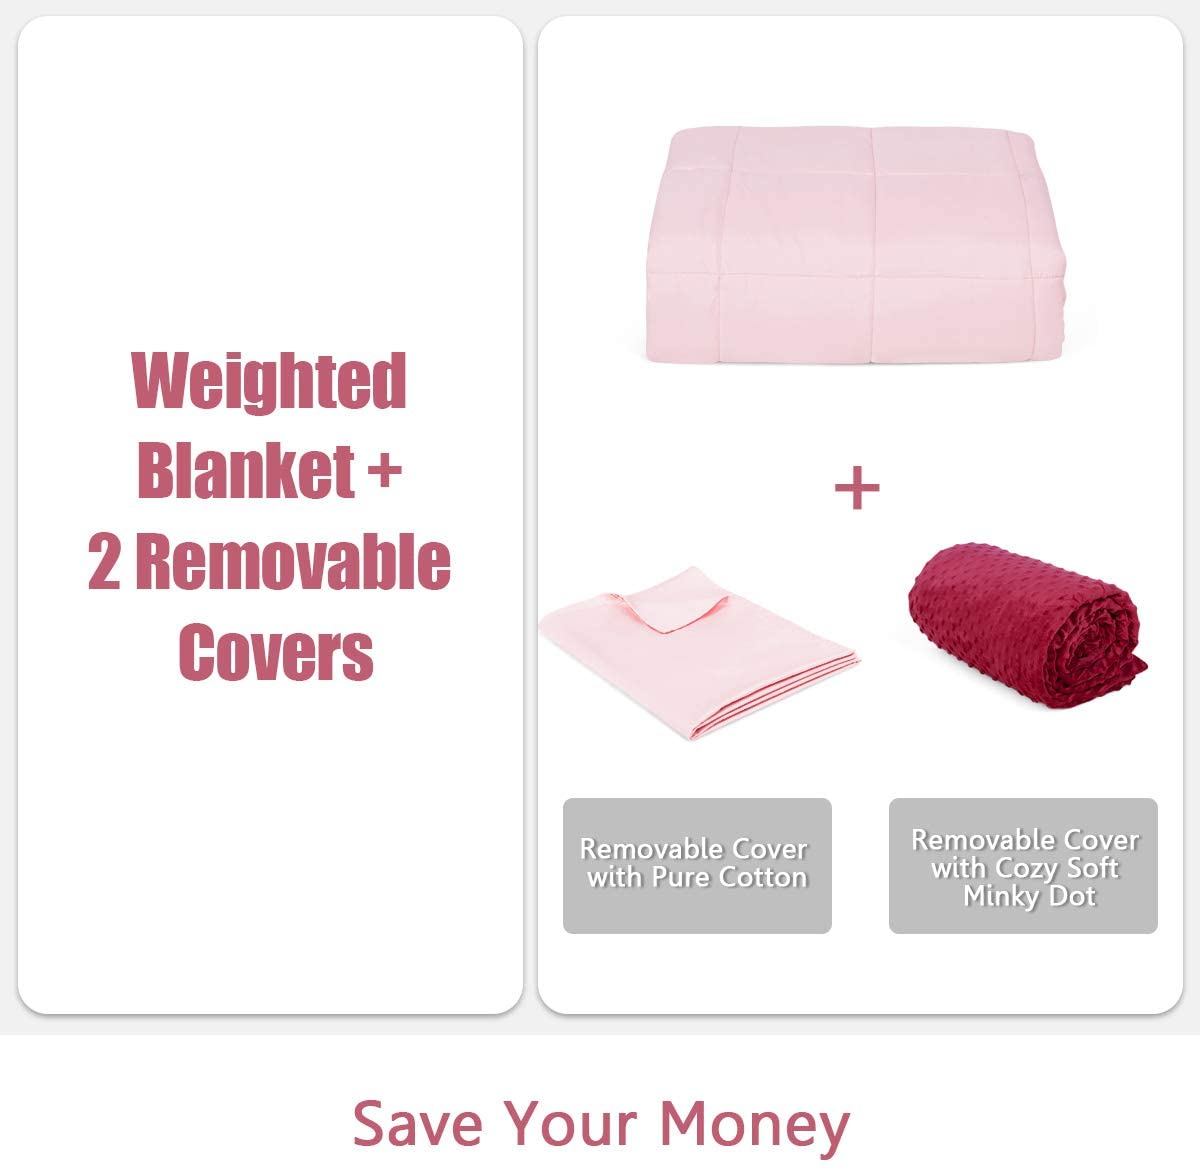 Weighted Blanket with Duvet Covers - Giantex